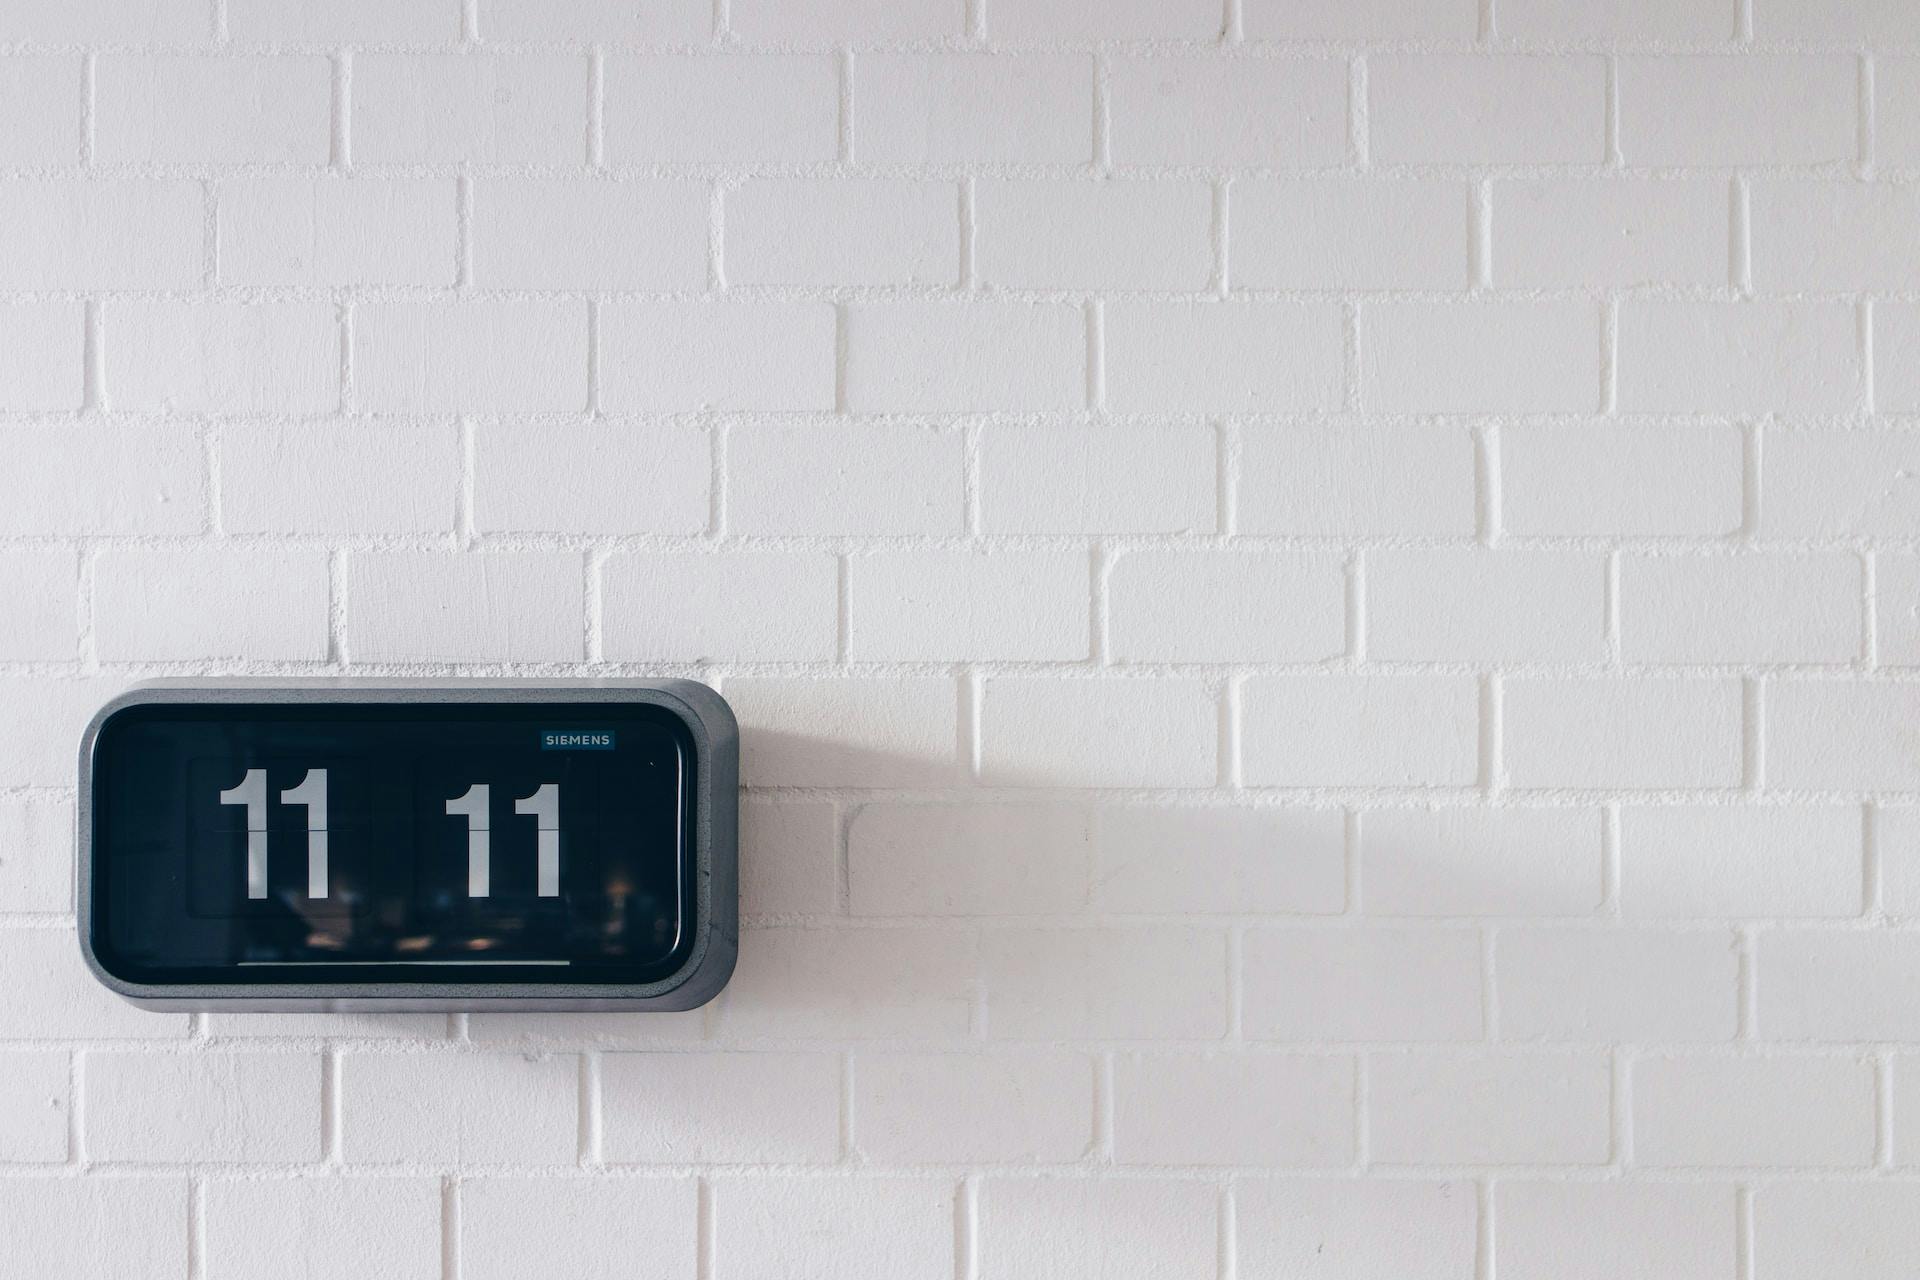 A digital clock on a white brick wall displaying the time 11:11